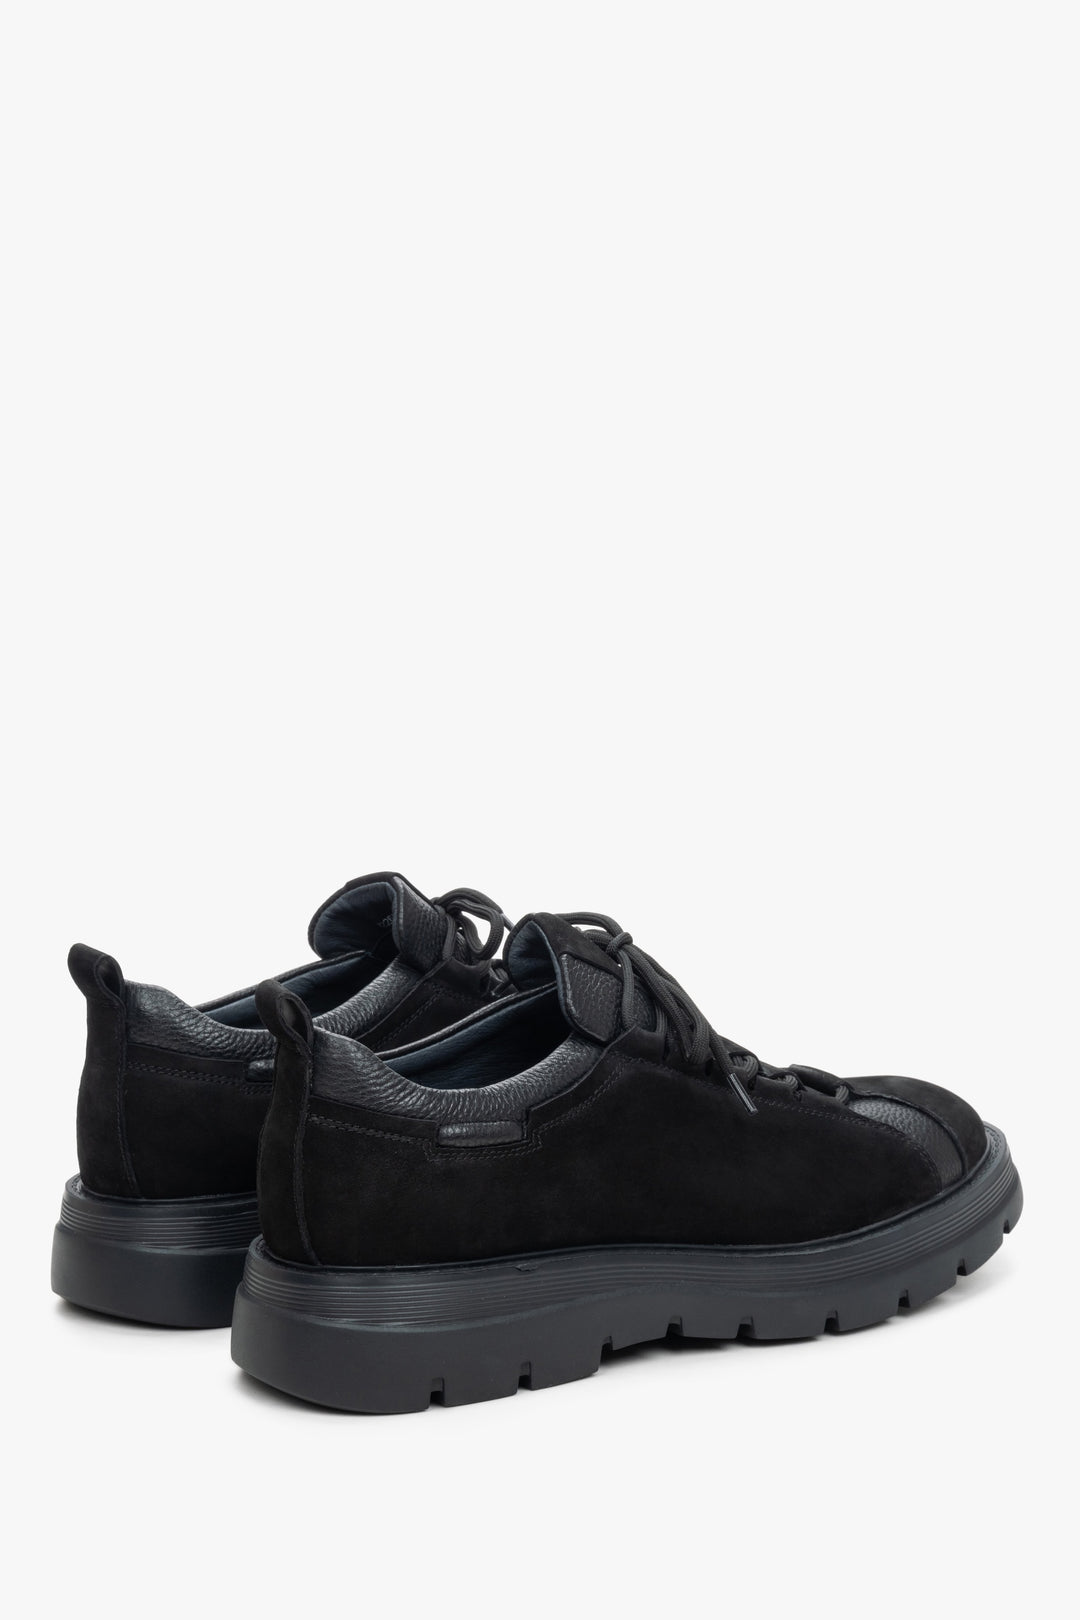 Men's black leather and nubuck sneakers - close-up on the side line and heel.